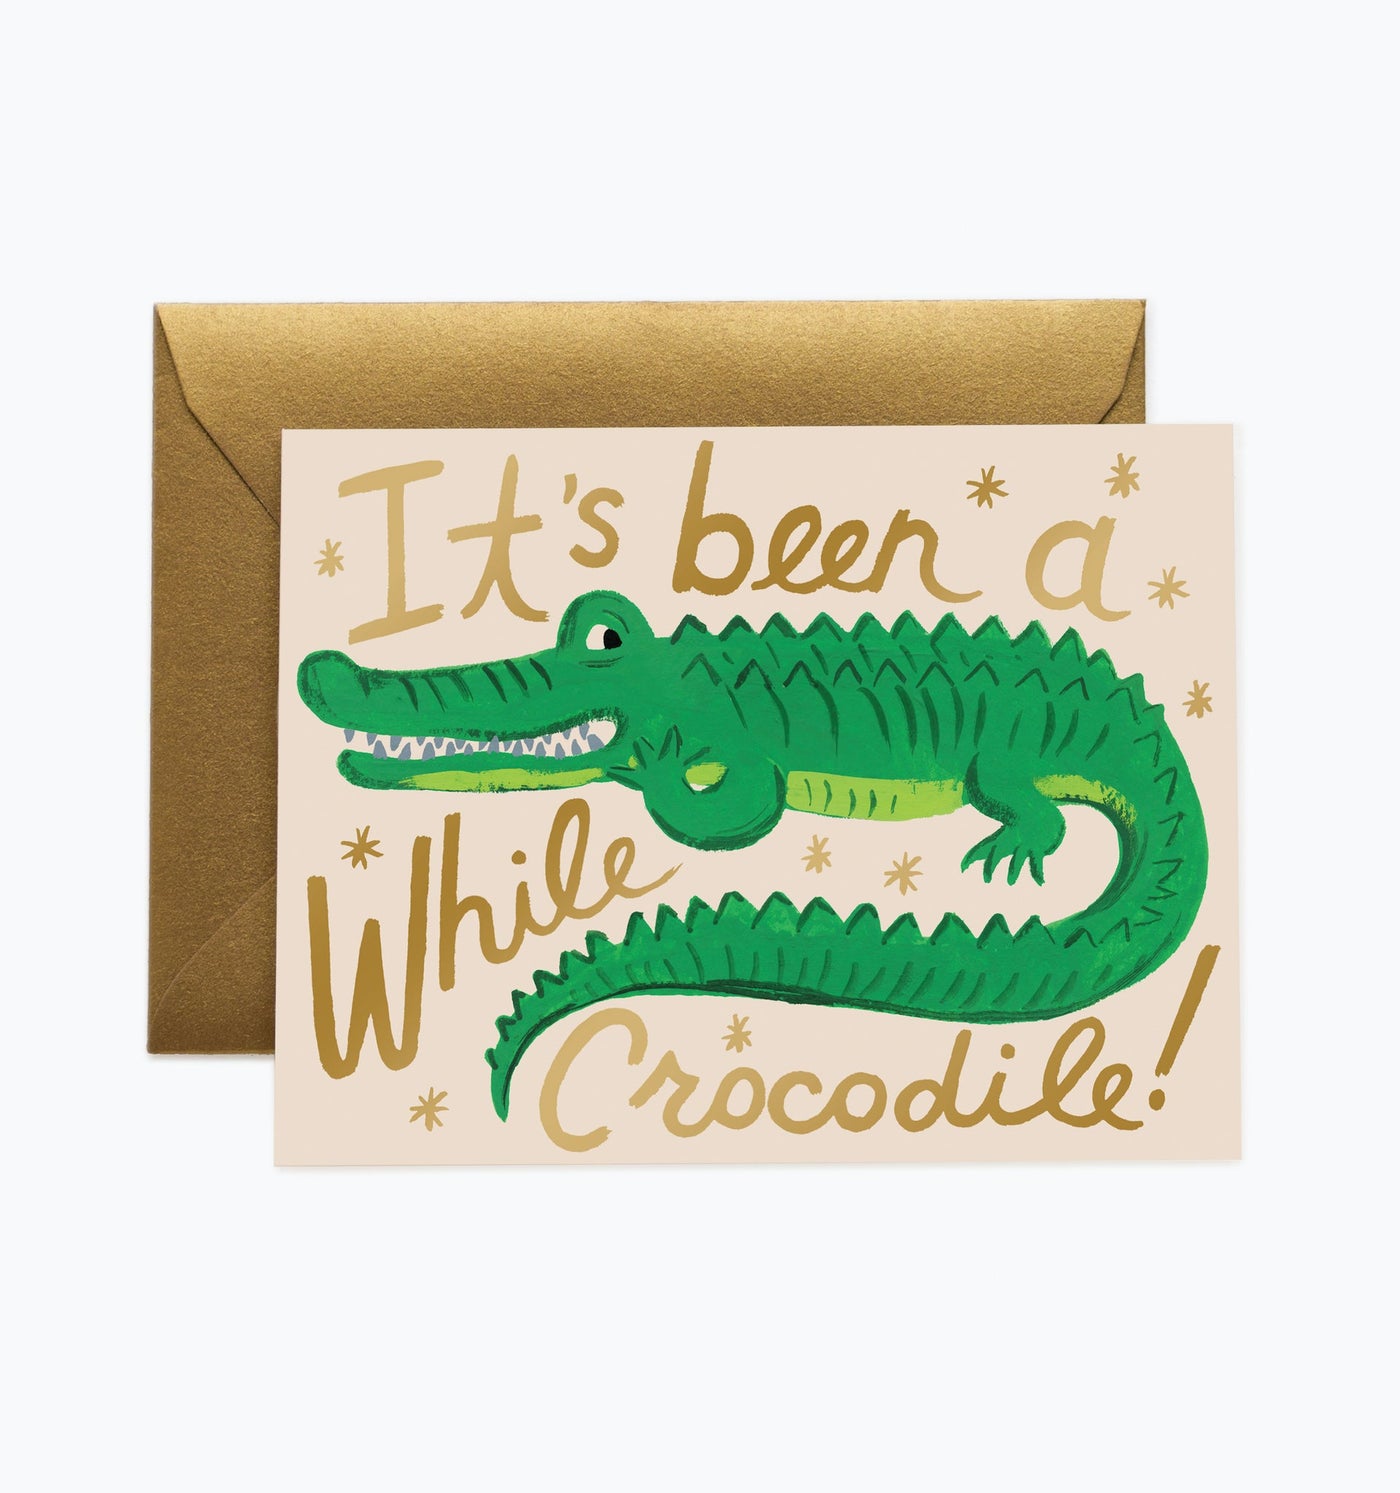 It's Been A While Crocodile! - Greetings Card by Rifle Paper Co